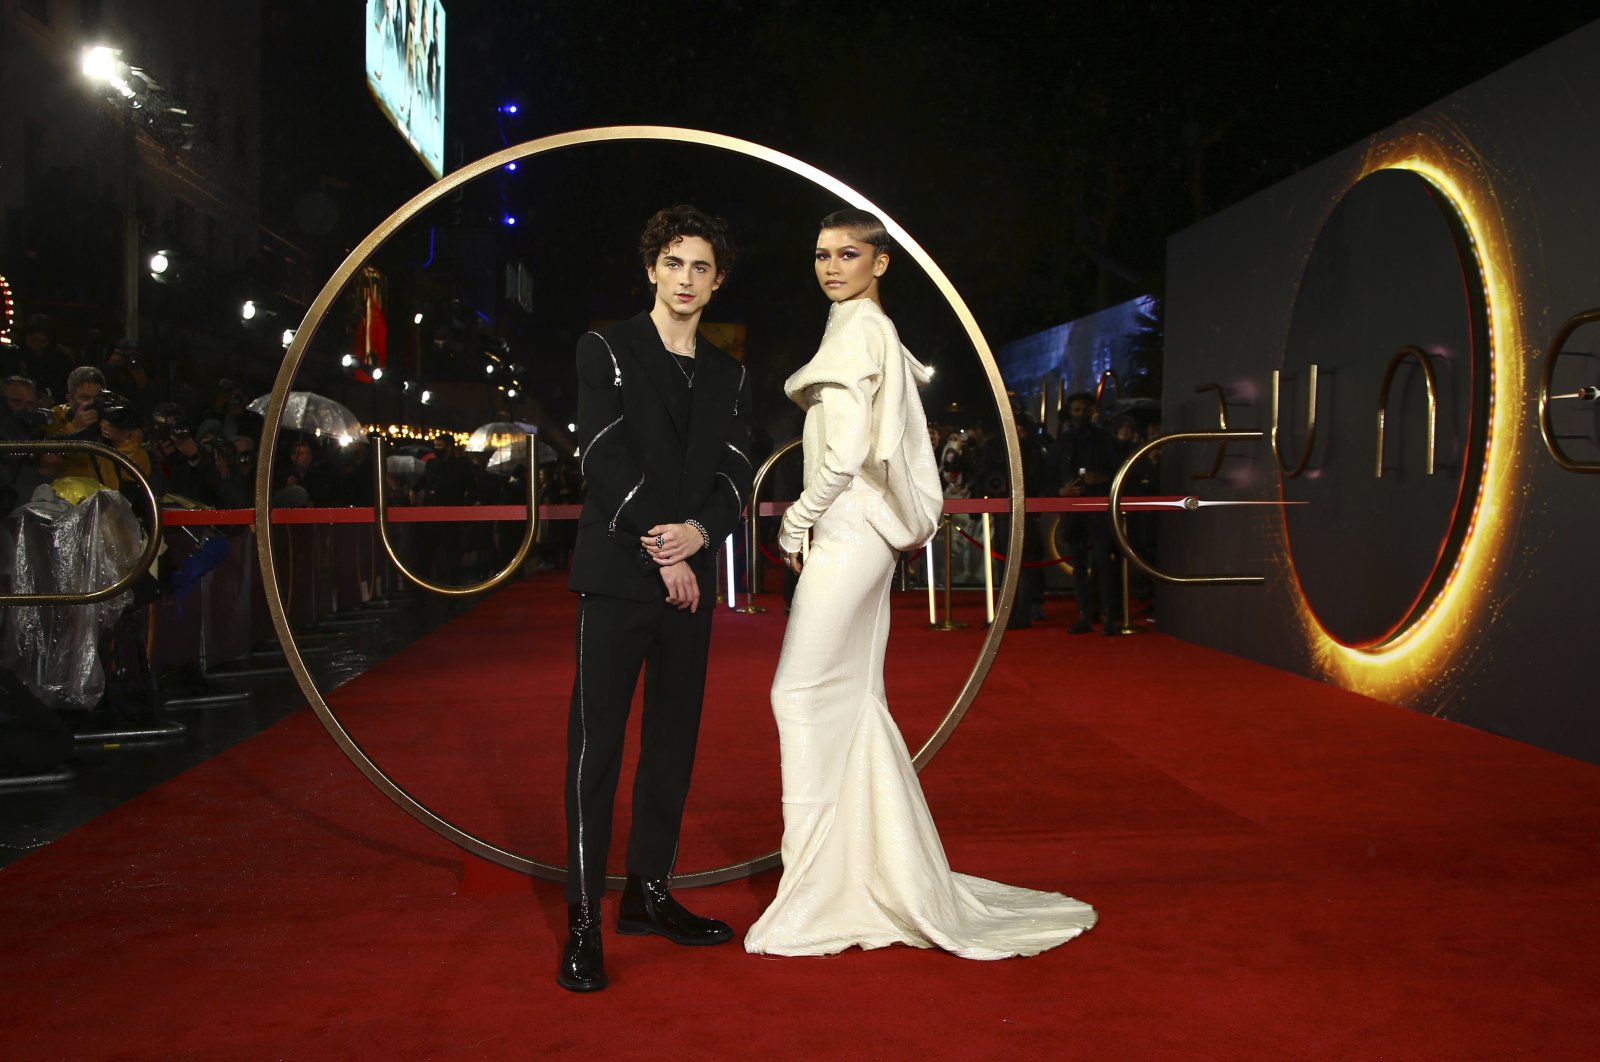 Timothee Chalamet (L) and Zendaya pose for photographers upon arrival at the premiere of the film &quot;Dune,&quot; in London, U.K., Oct. 18, 2021. (AP Photo)